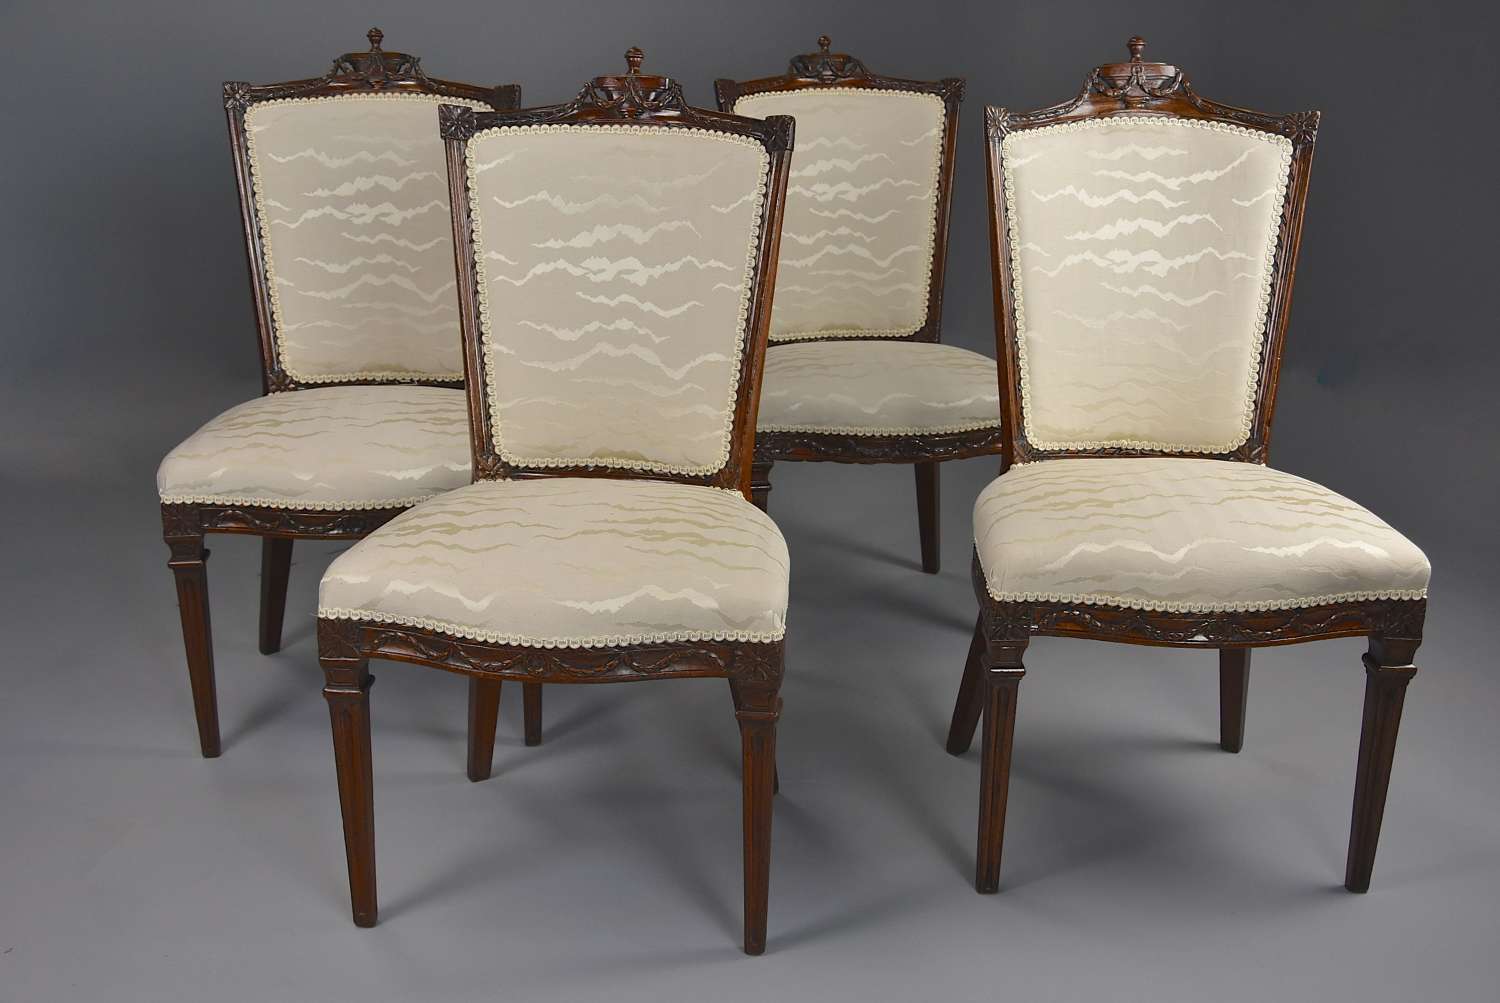 Set of four late 18thc Continental walnut chairs, possibly Italian